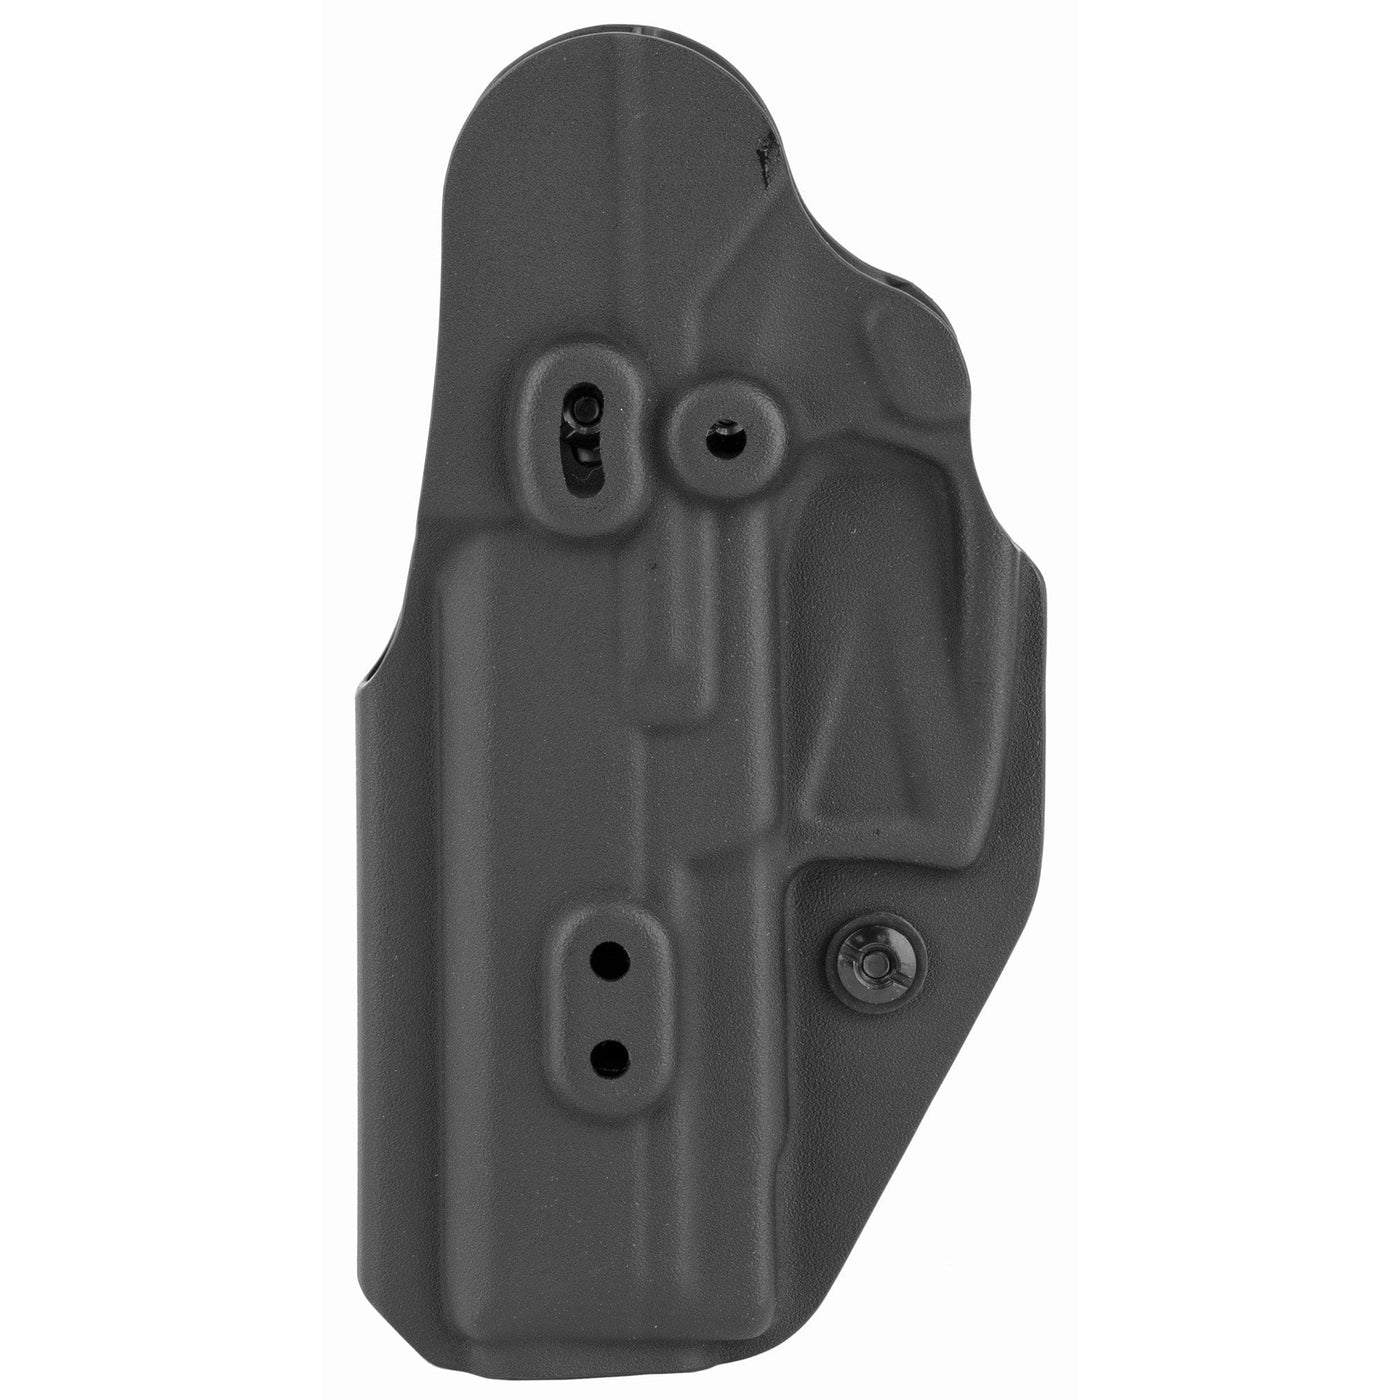 L.A.G. Tactical, Inc. Lag Lib Mk Ii H&k Vp9/vp9sk Blk Ambi Holsters